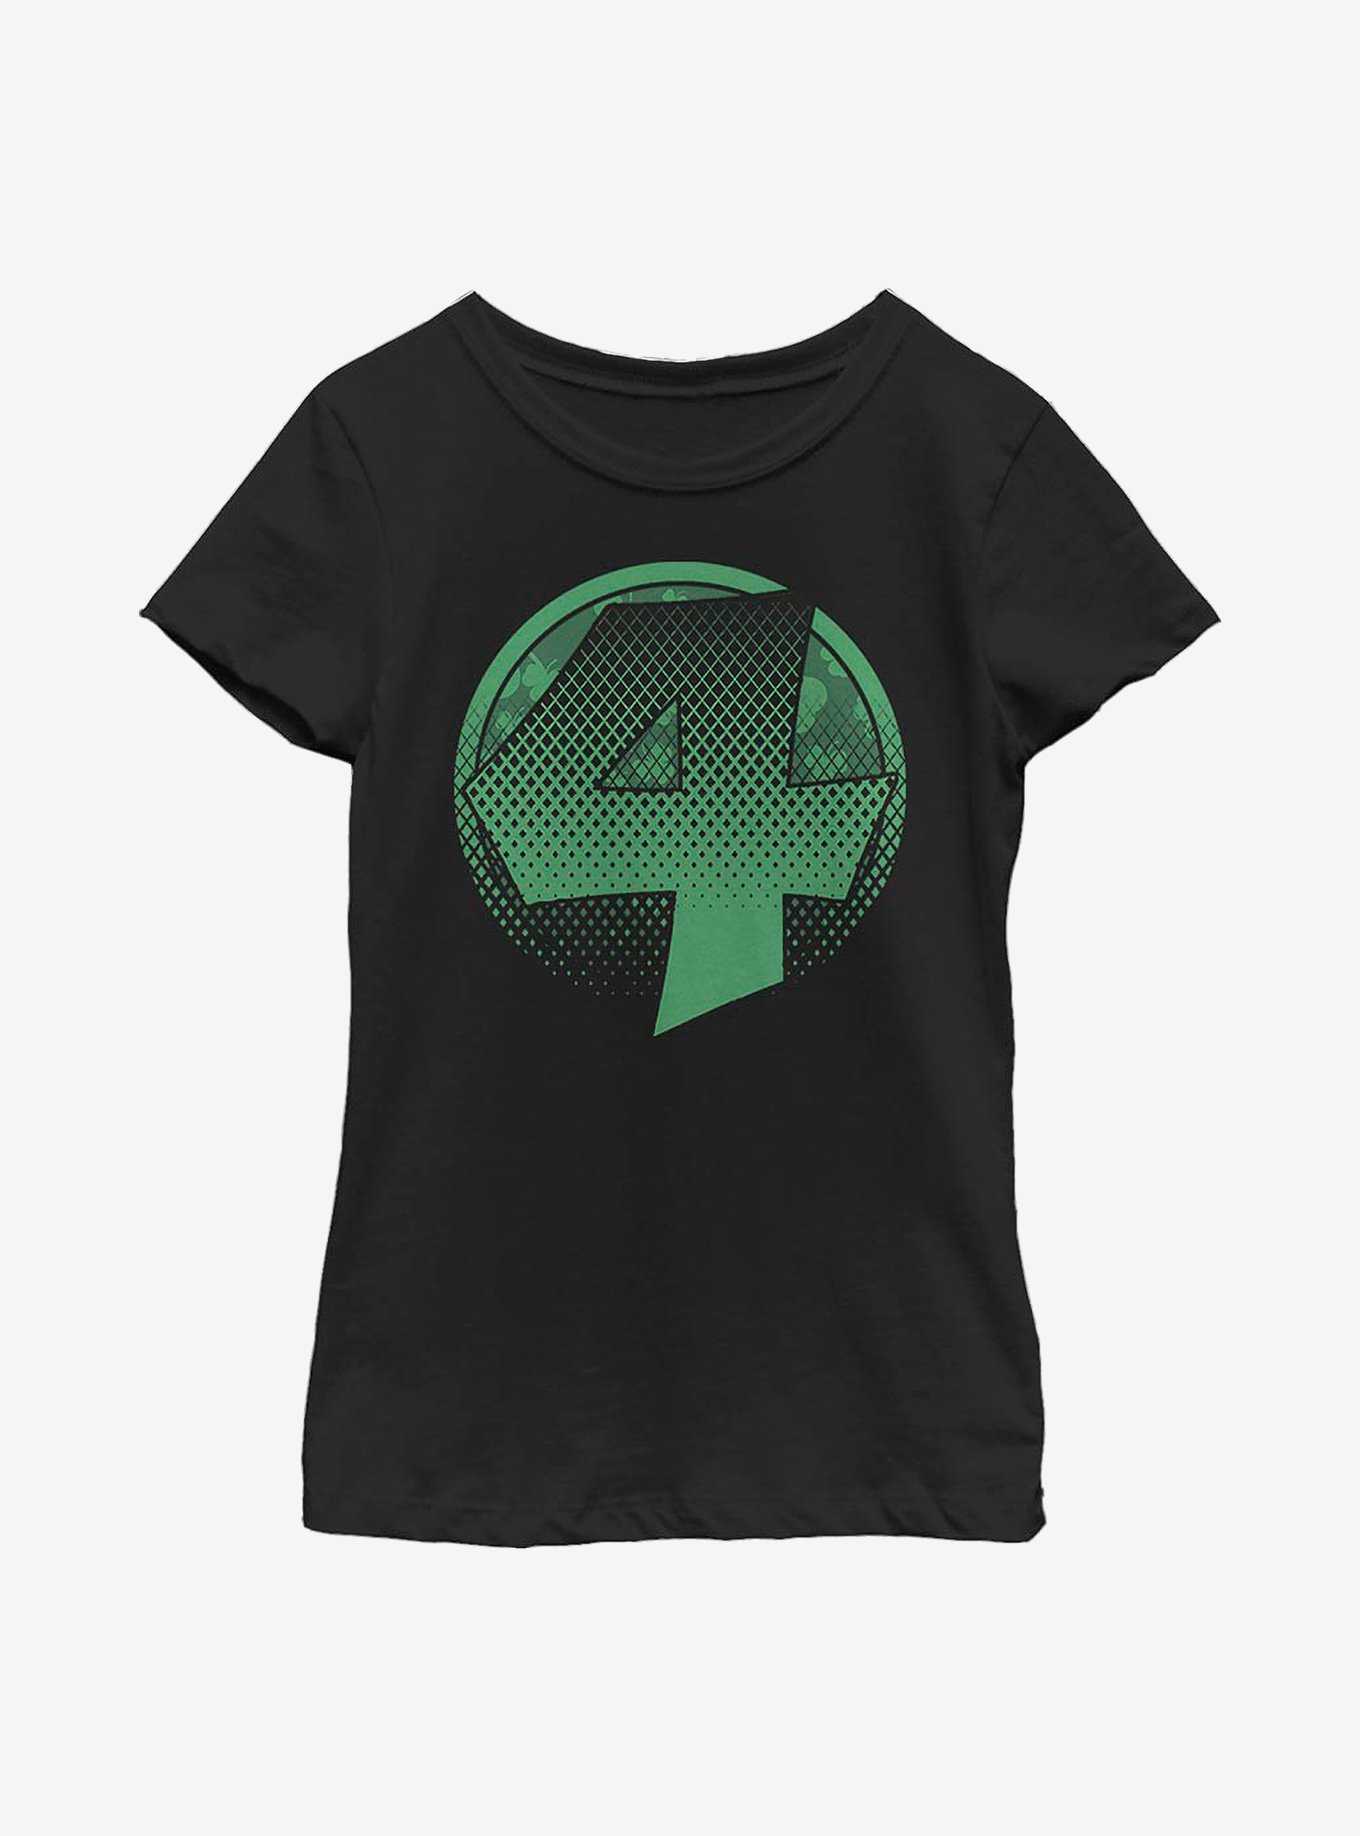 Marvel Fantastic Four Lucky 4 Youth Girls T-Shirt, , hi-res